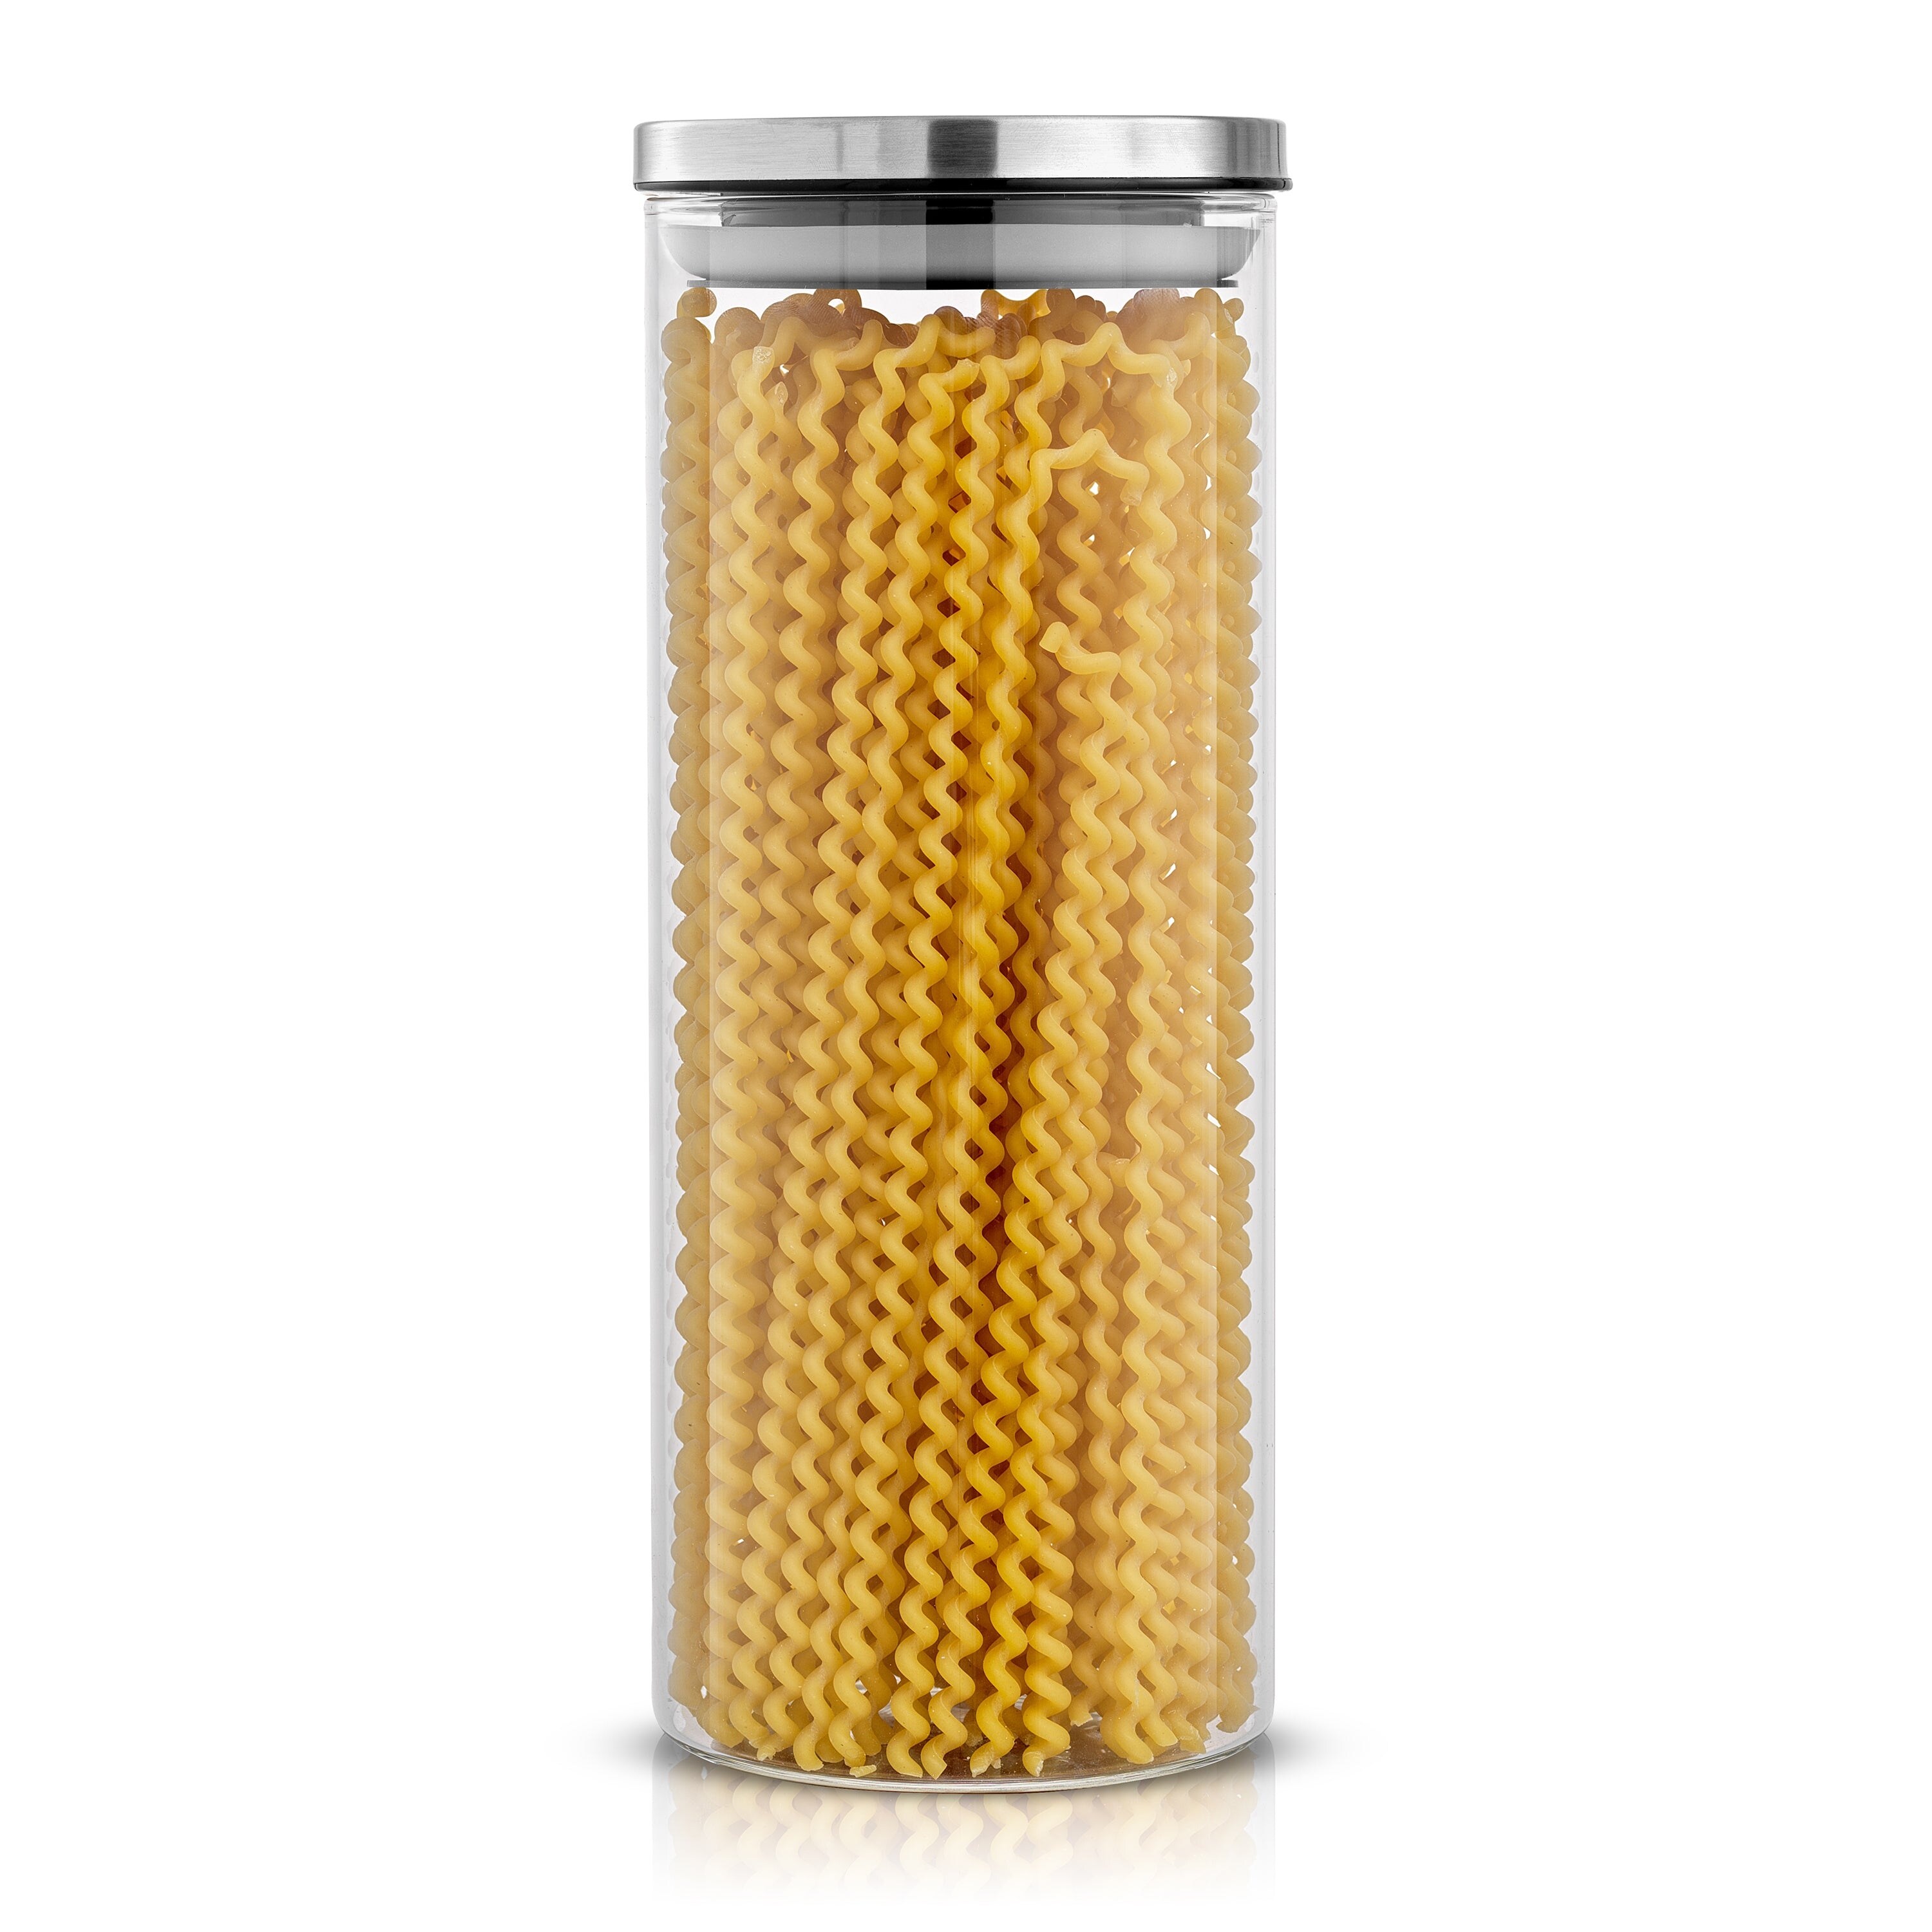 https://ak1.ostkcdn.com/images/products/is/images/direct/43aa8702ba79bf2e4c09afbd9bbab66e626904d7/JoyJolt-Kitchen-Canister-Glass-Jars-Food-Storage-Containers-with-Airtight-Lids-Set-of-6.jpg